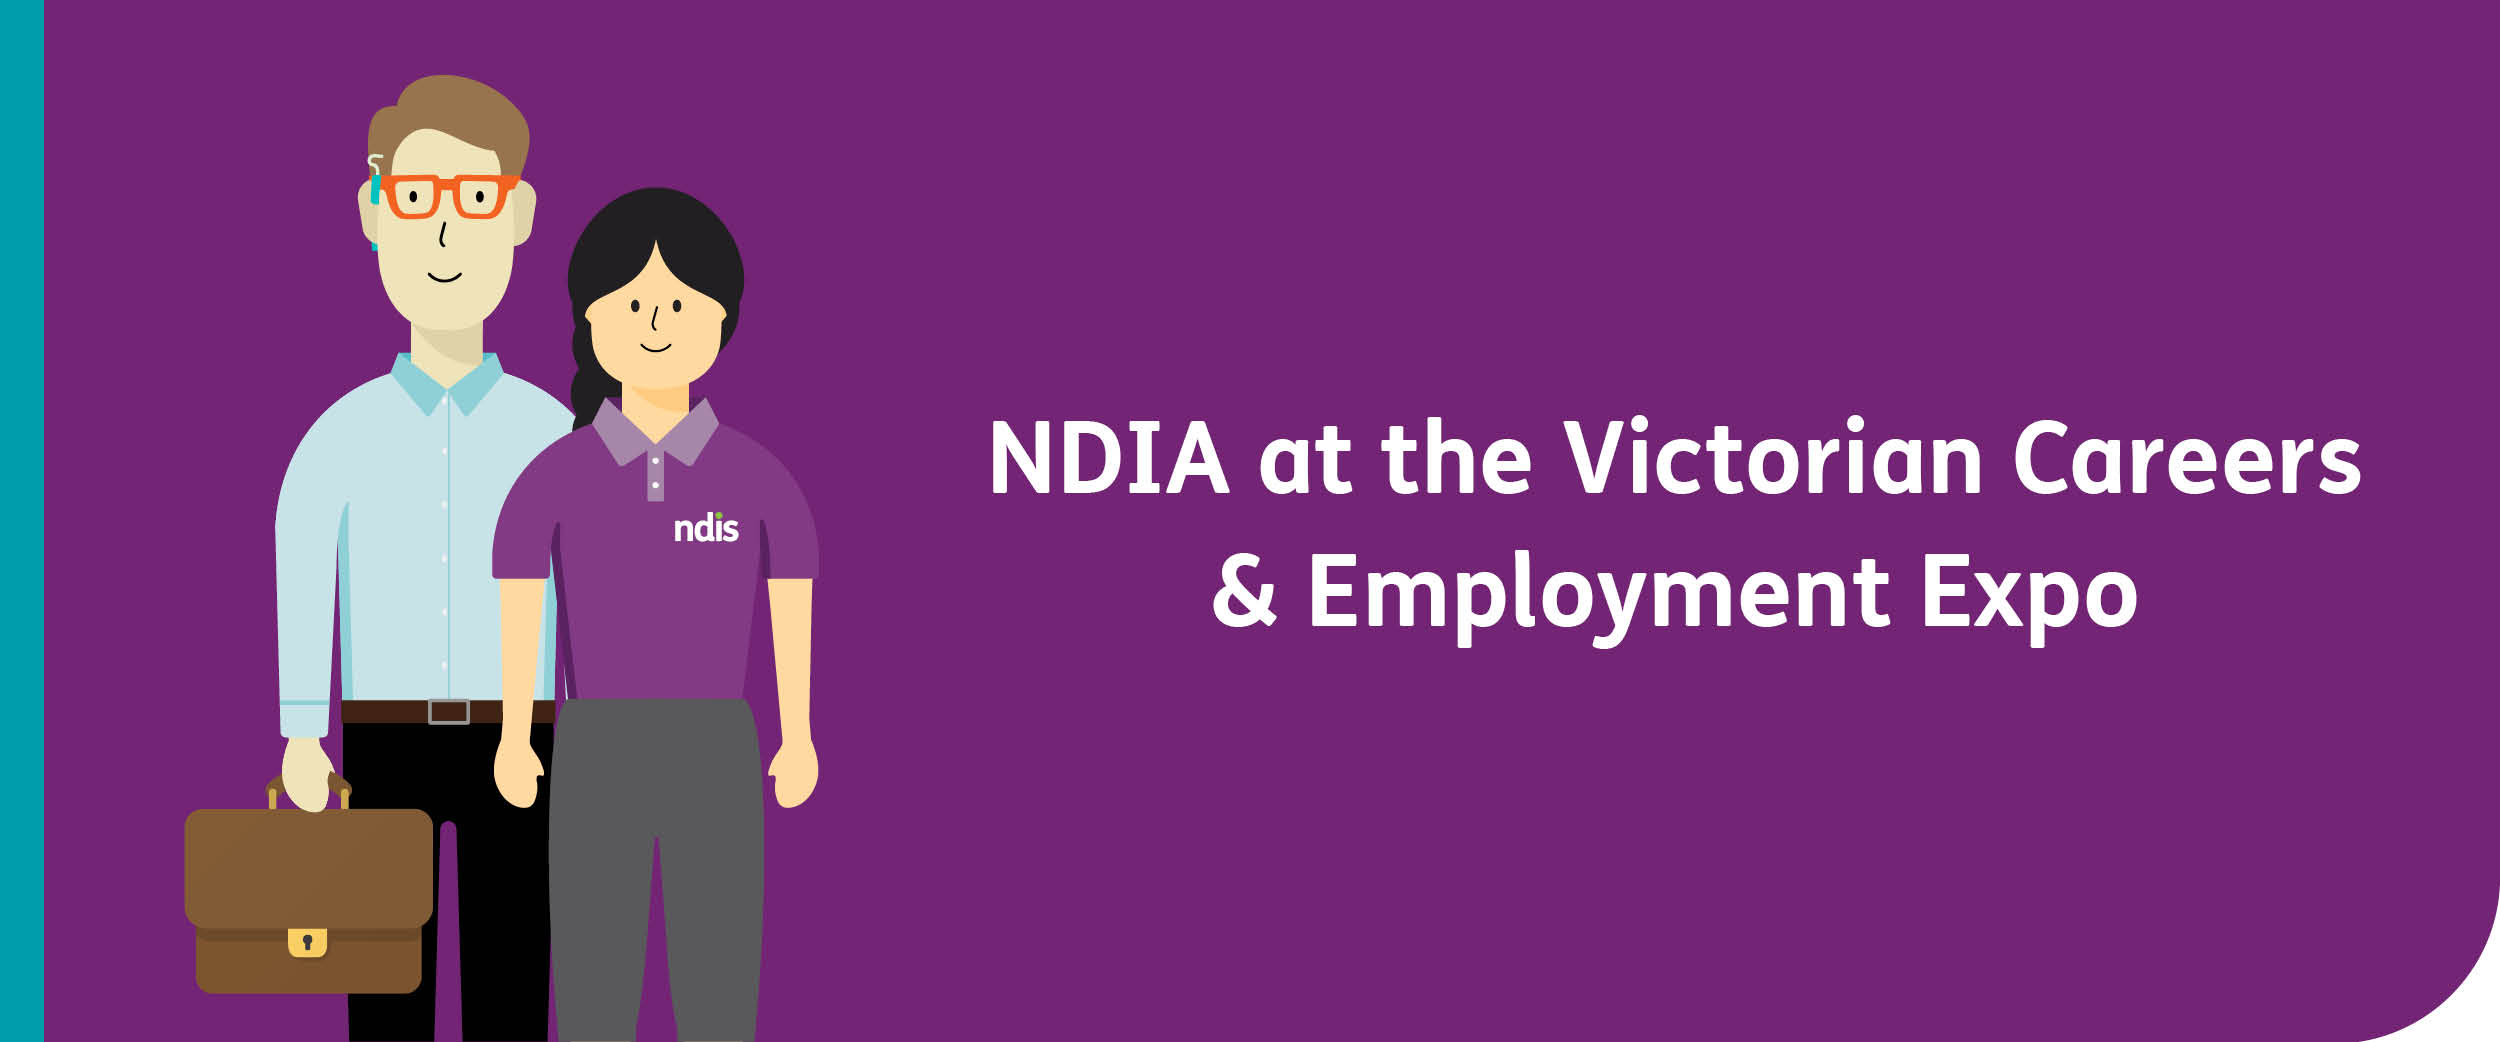 NDIA at the Victorian Careers & Employment Expo with a cartoon of 2 people, 1 is wearing an NDIS t-shirt, the other is carrying a brief case